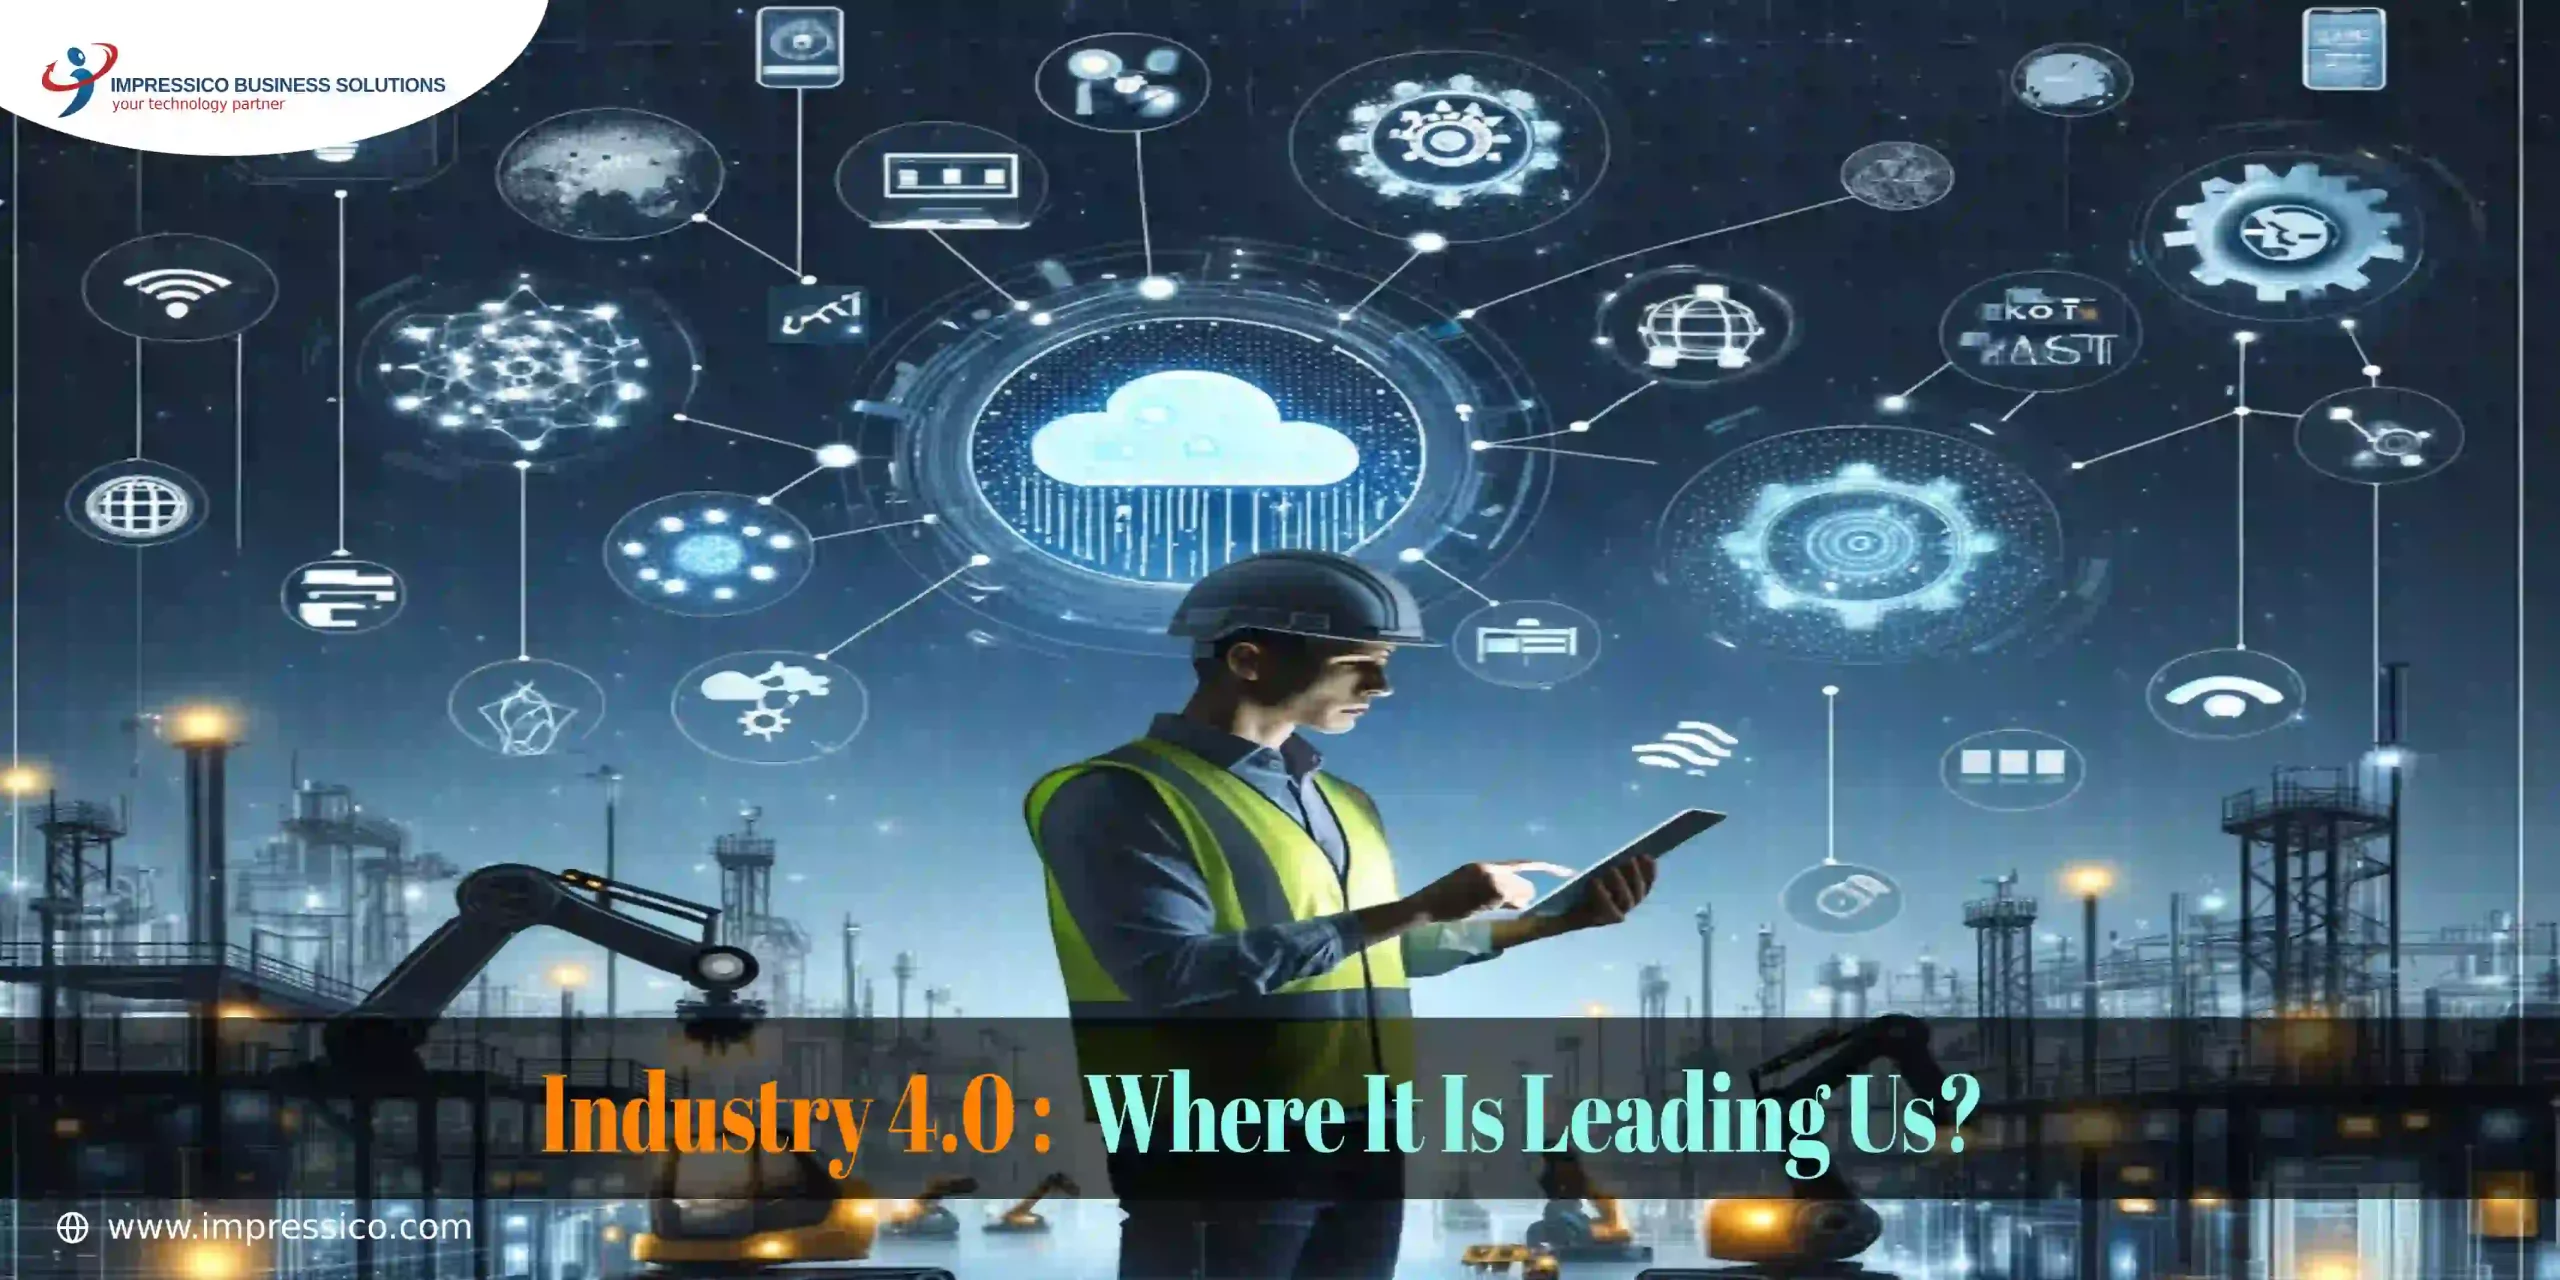 Industry 4.0 and Where It Is Leading Us?